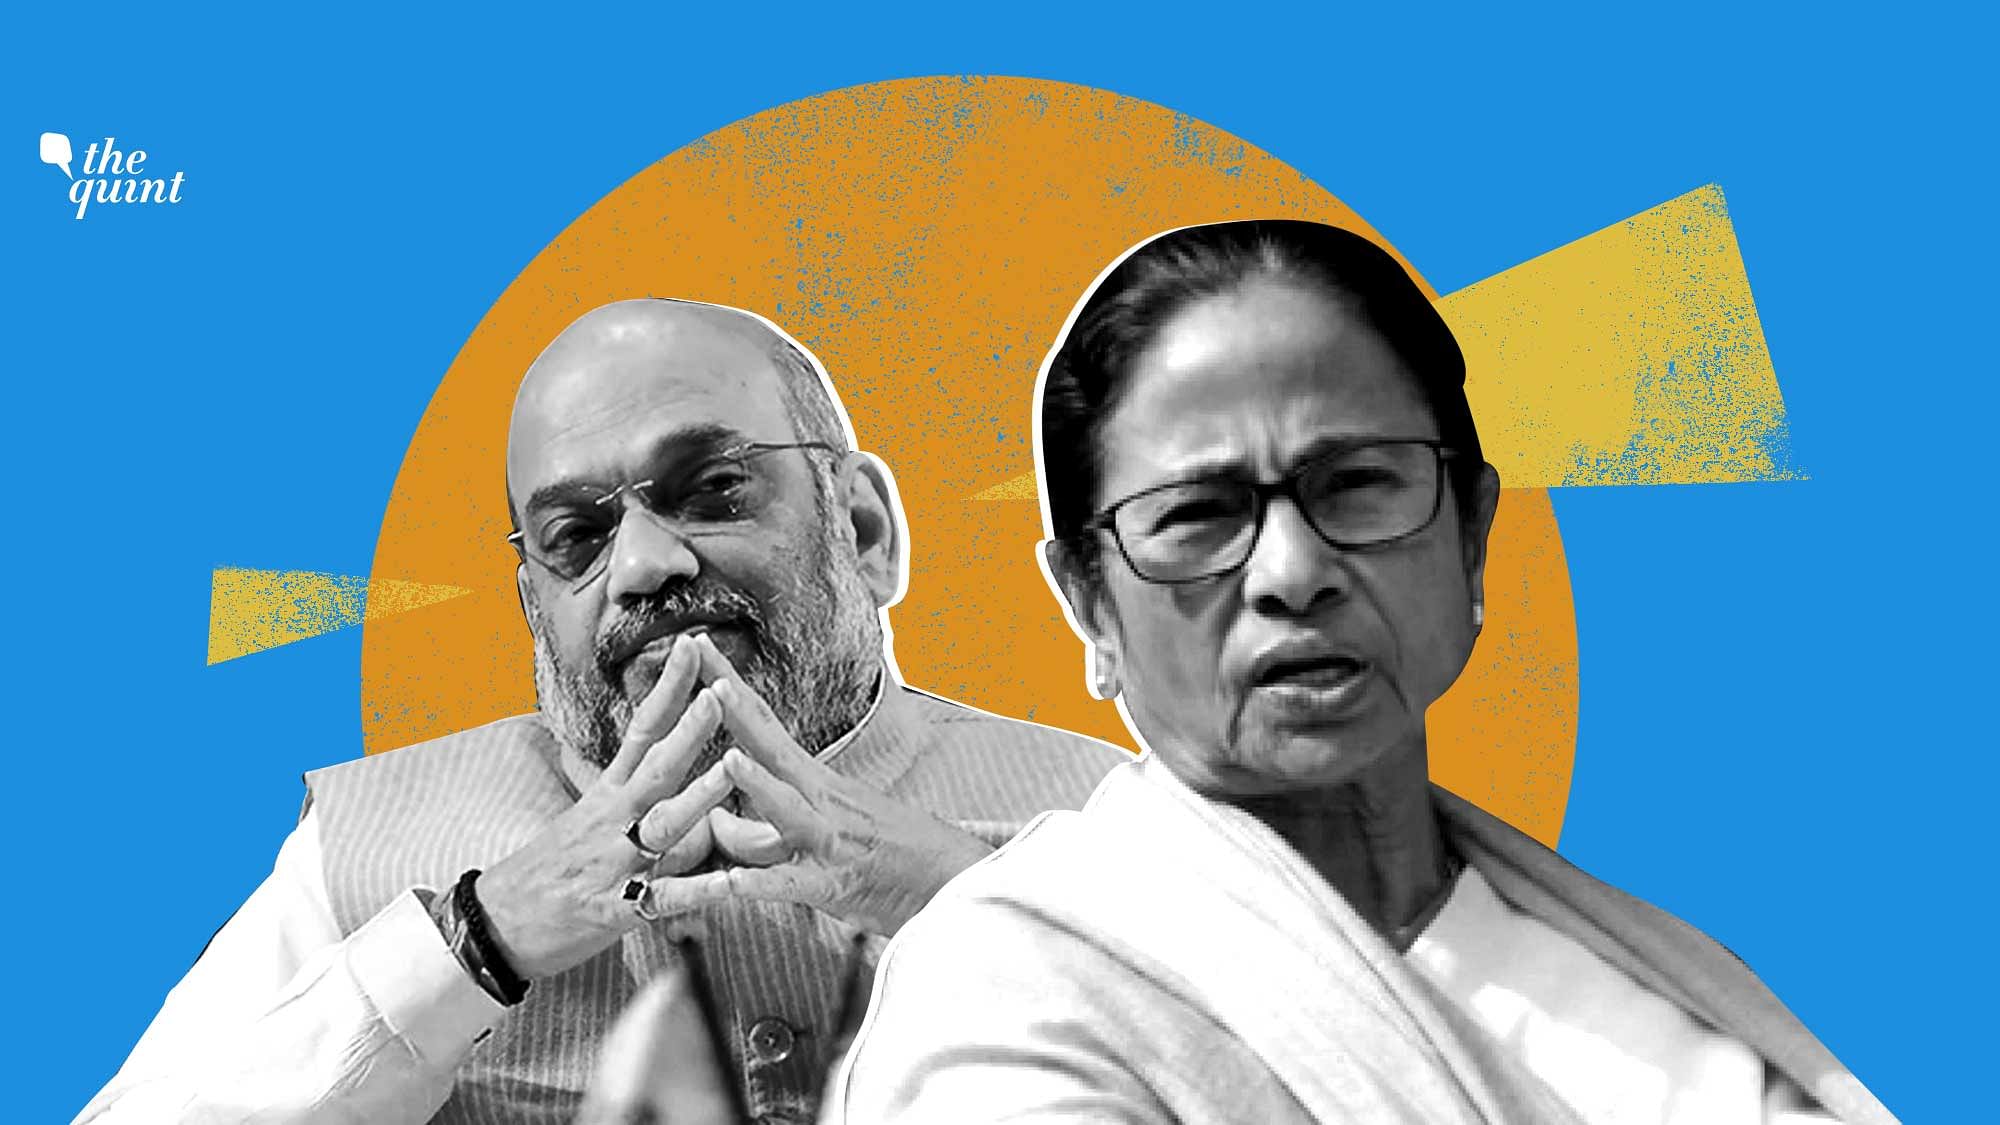 The BJP released an audio clip on the evening of 16 April, a day before the fifth phase of polling.